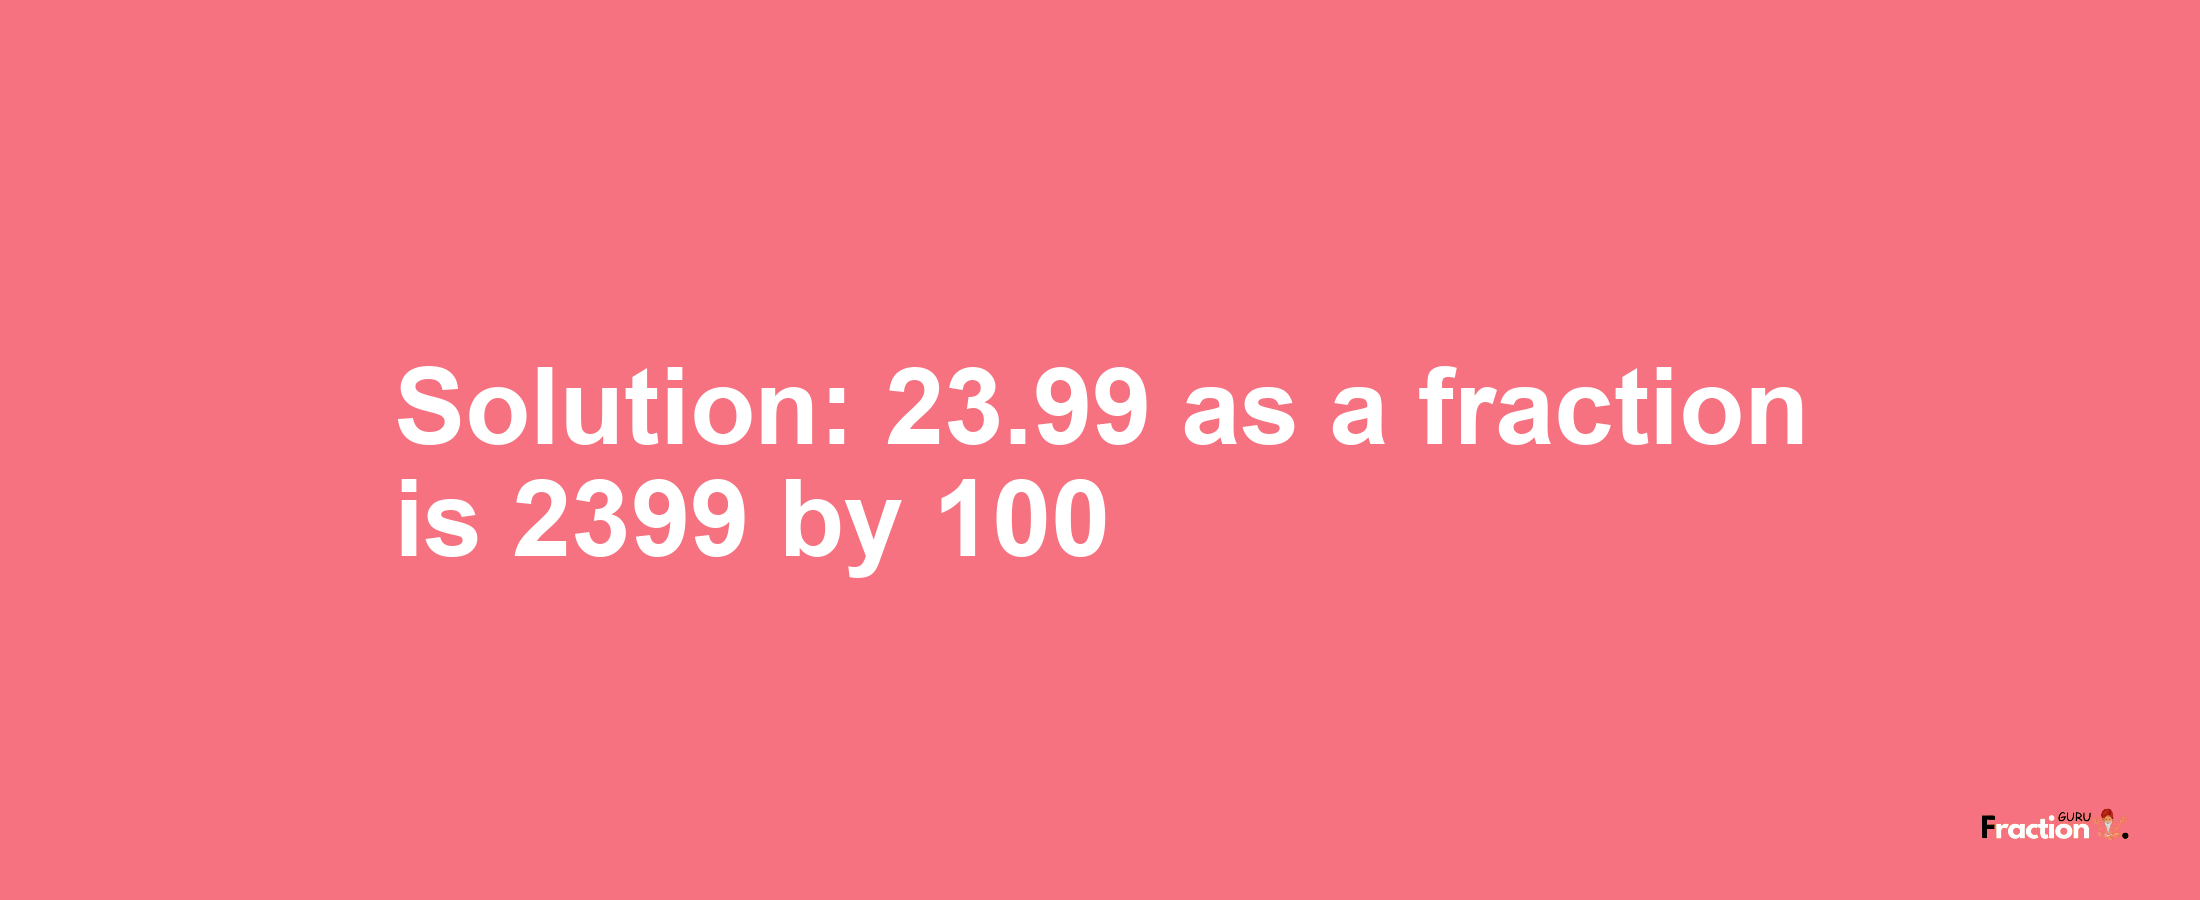 Solution:23.99 as a fraction is 2399/100